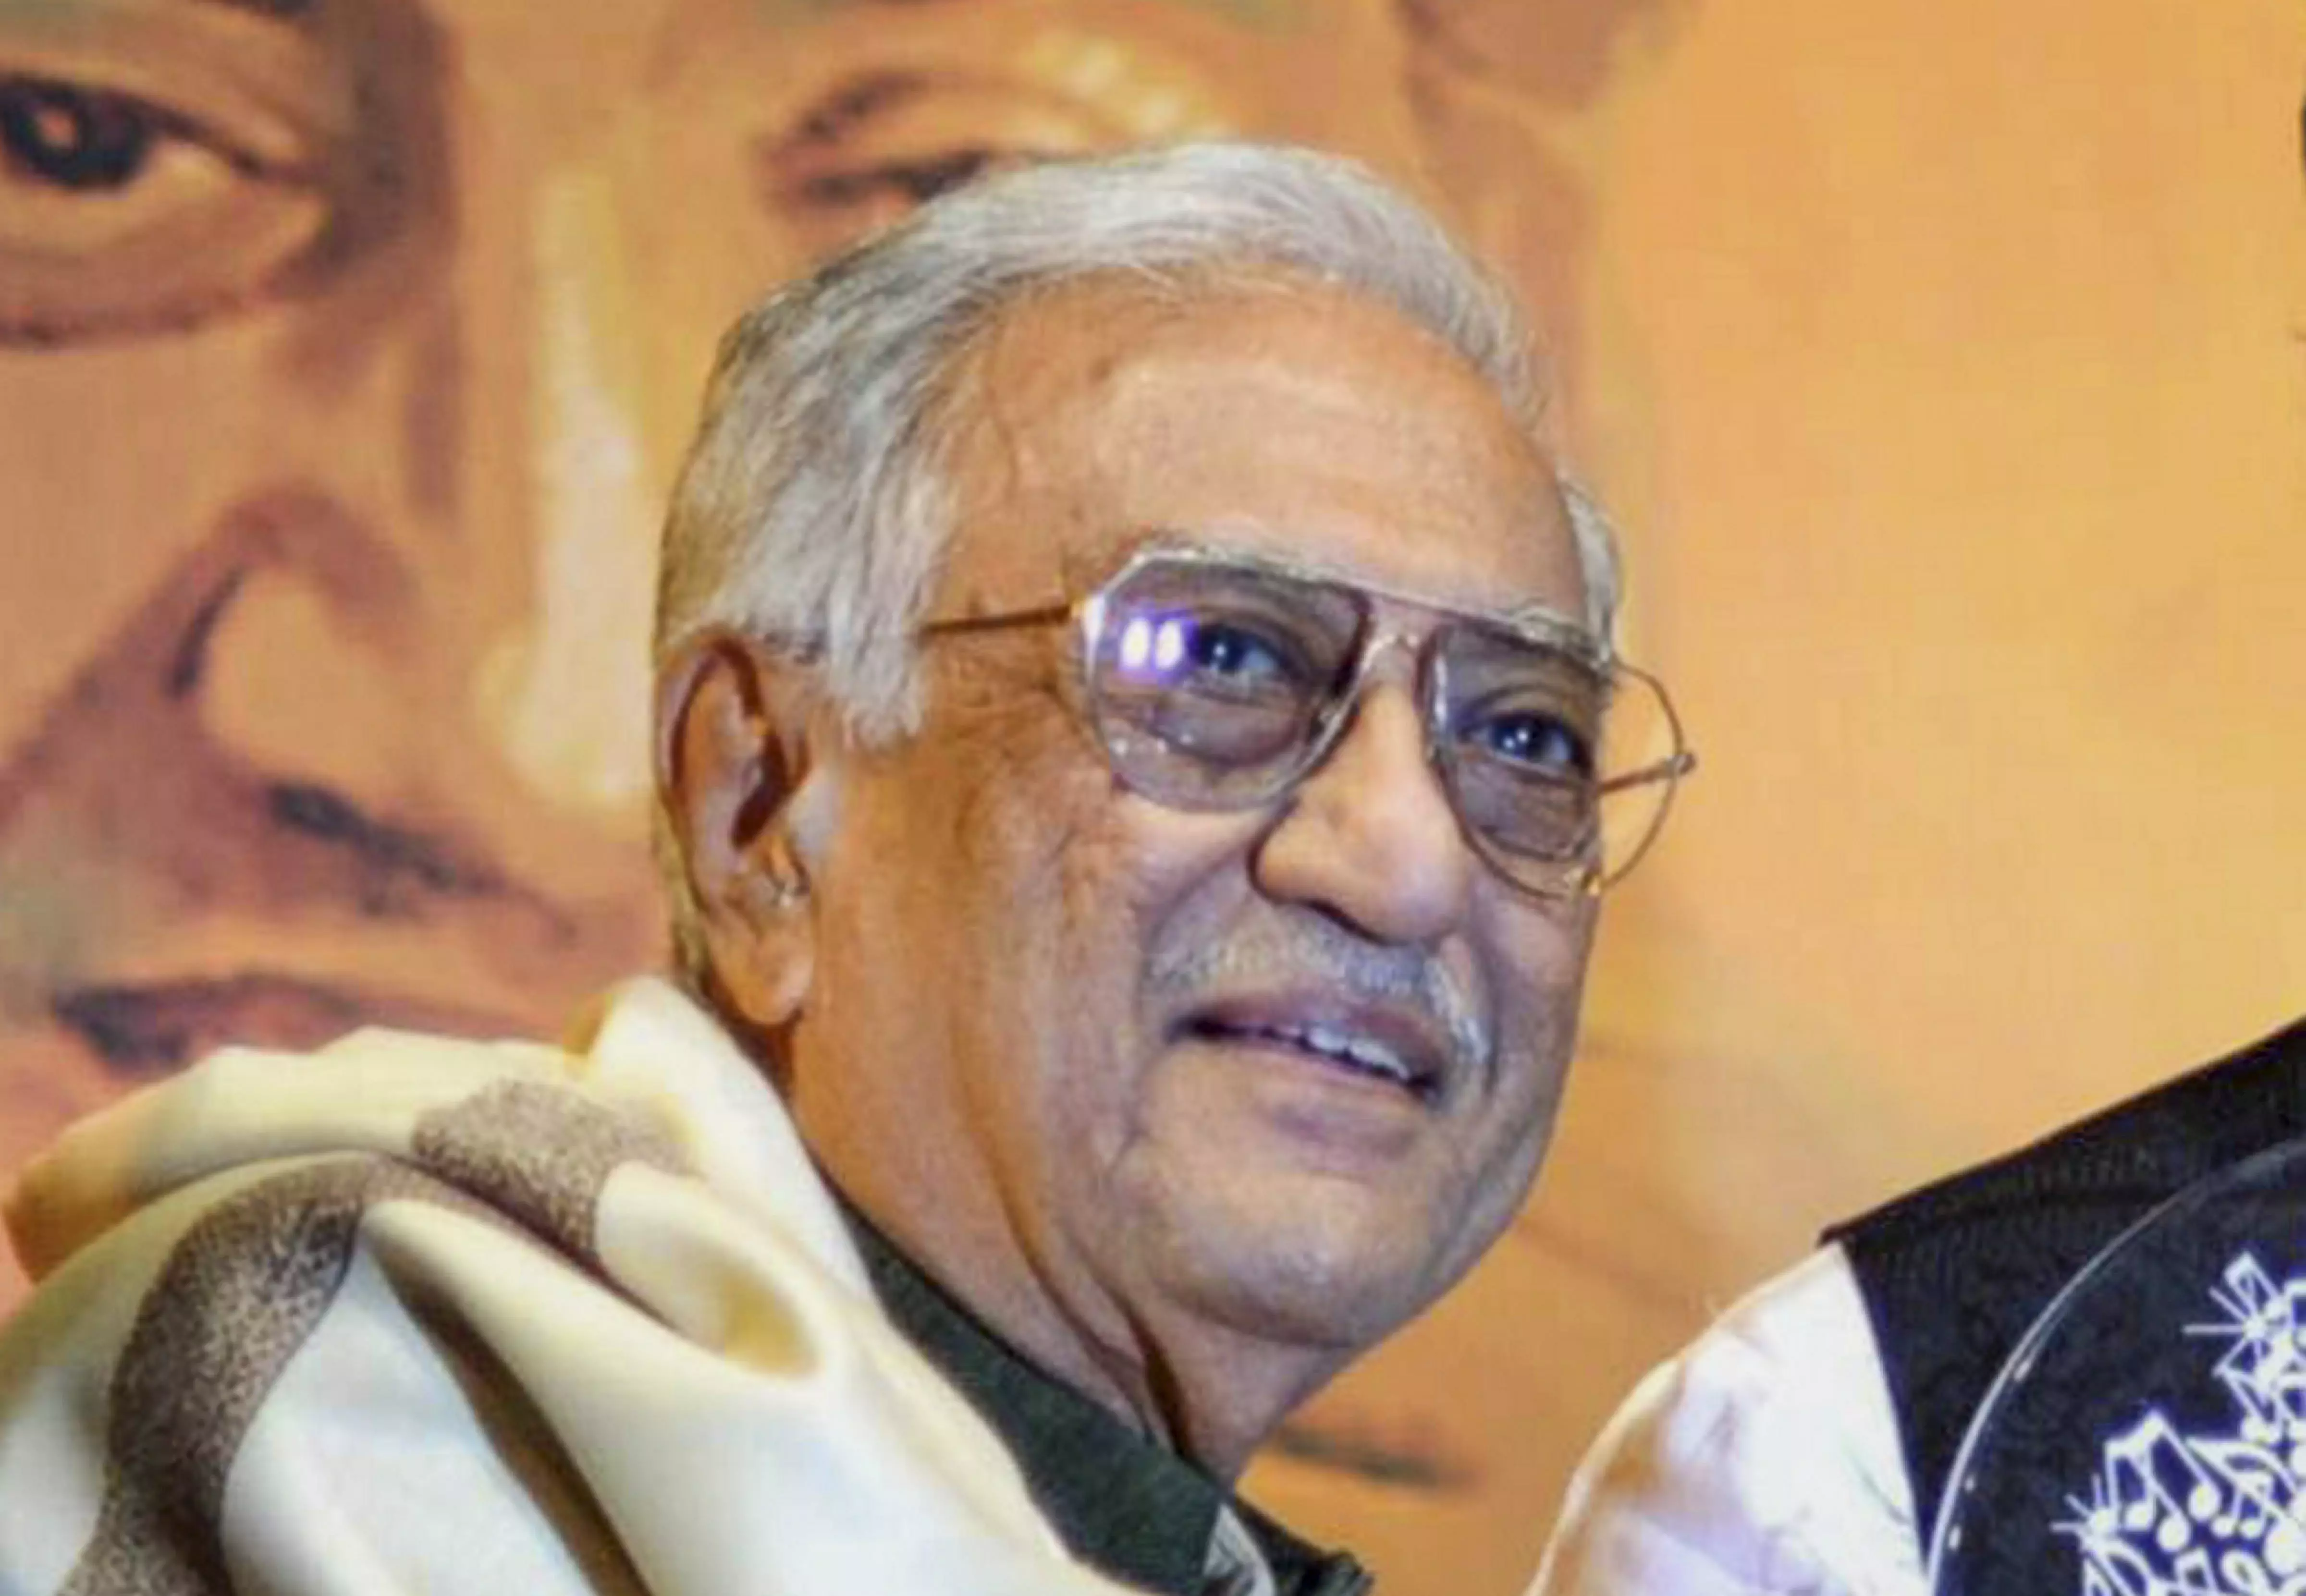 Dont miss the irony in Modi’s homage to Ameen Sayani